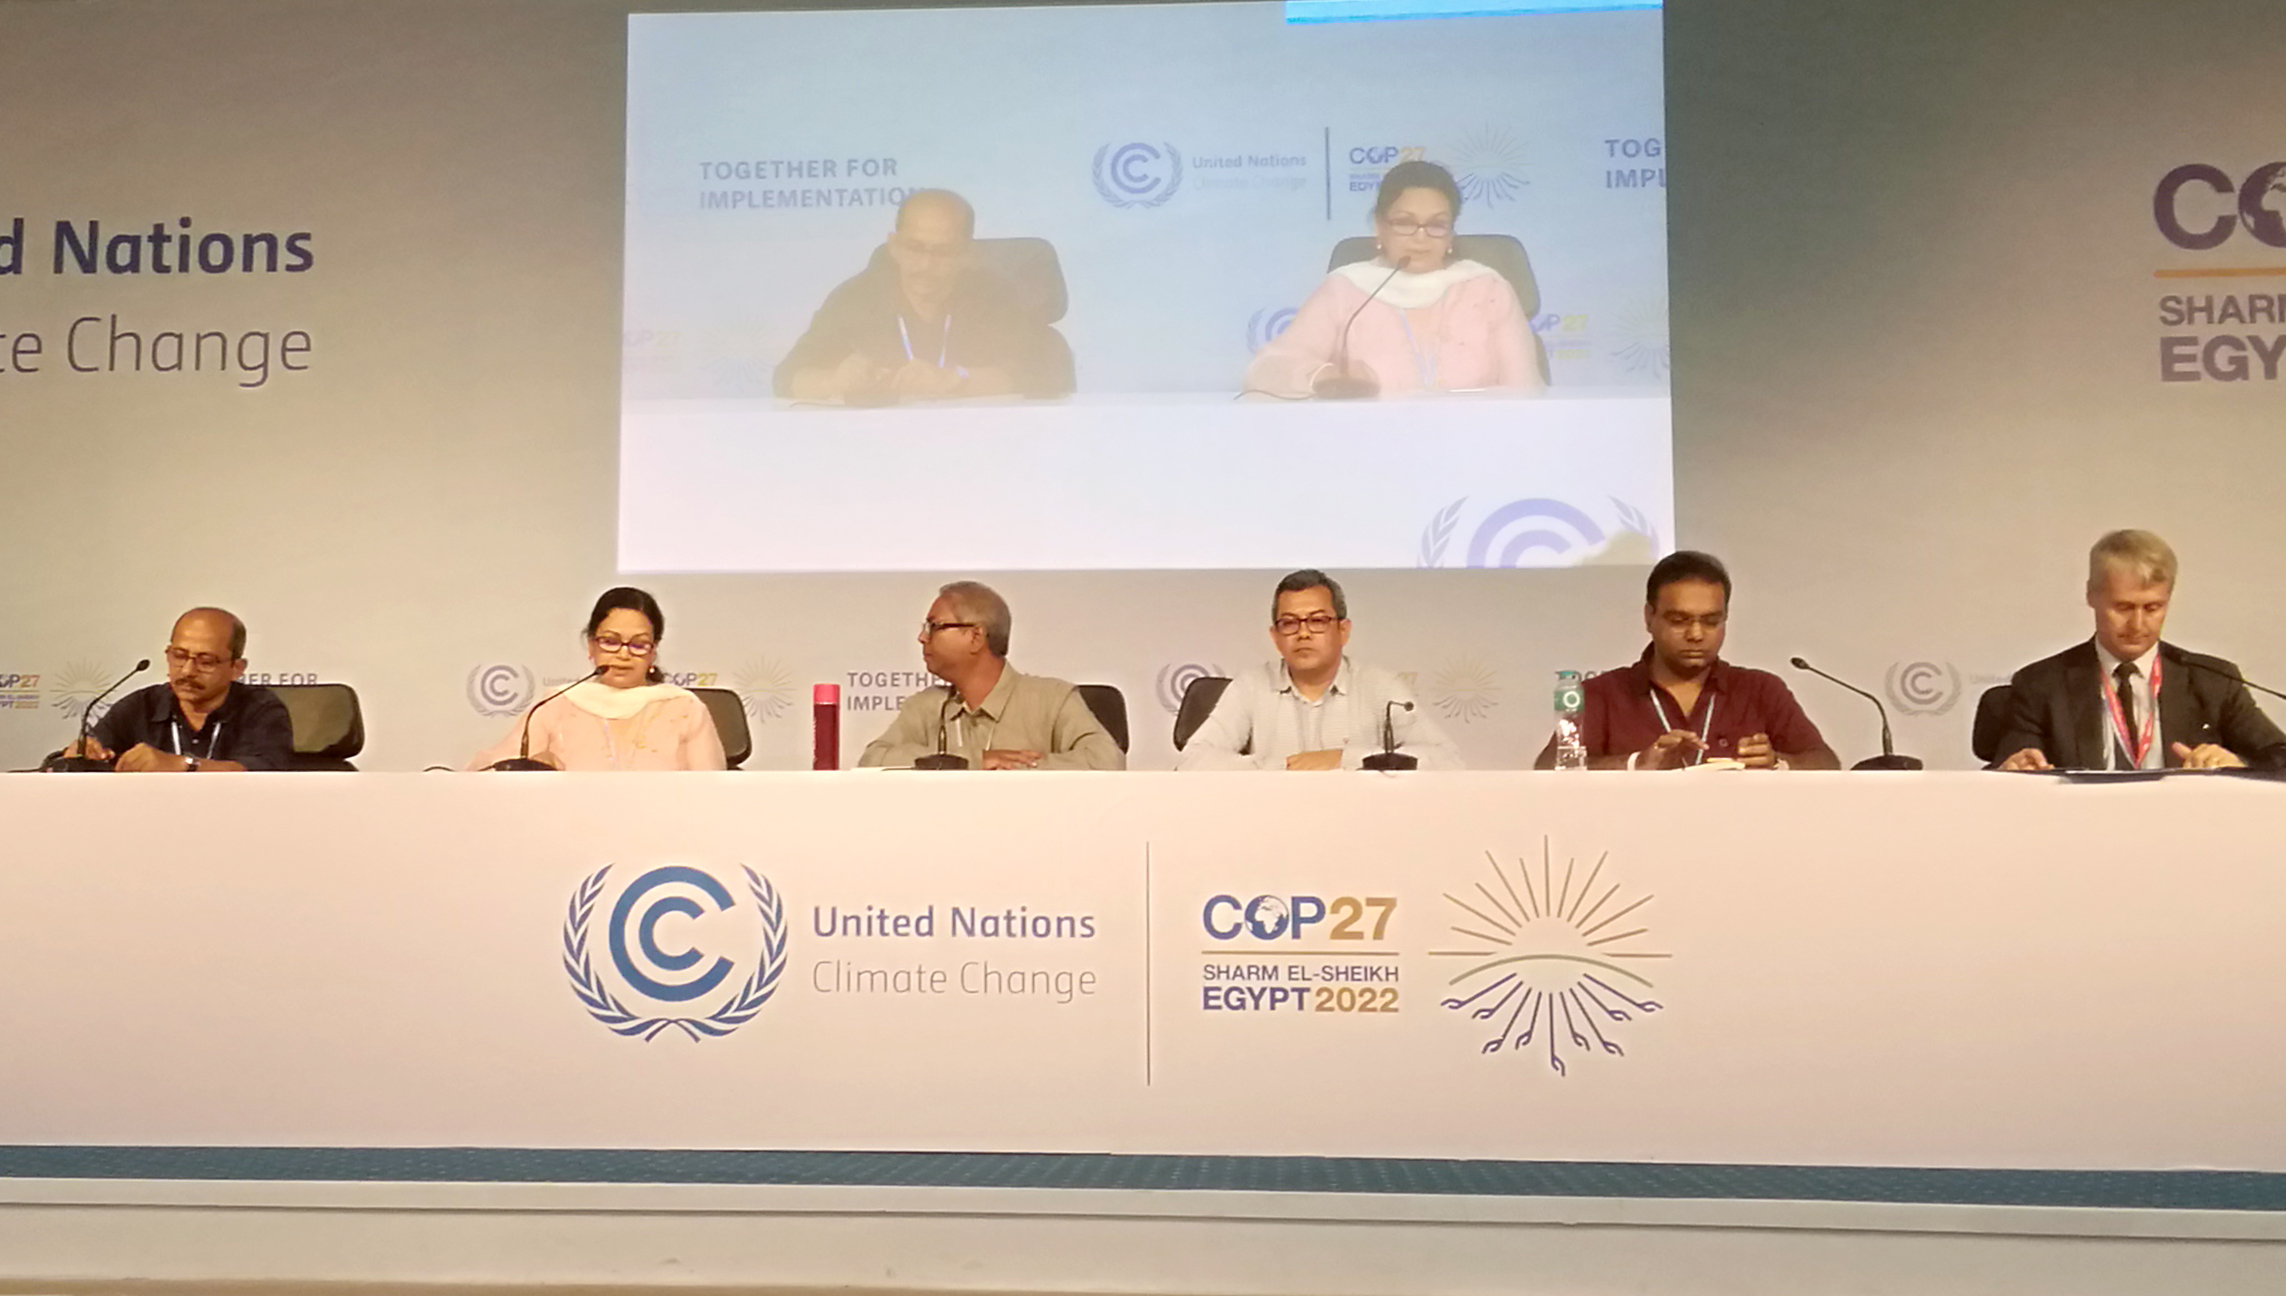 Rich countries to fulfil the financing gap to climate action for MVCs and LDCs